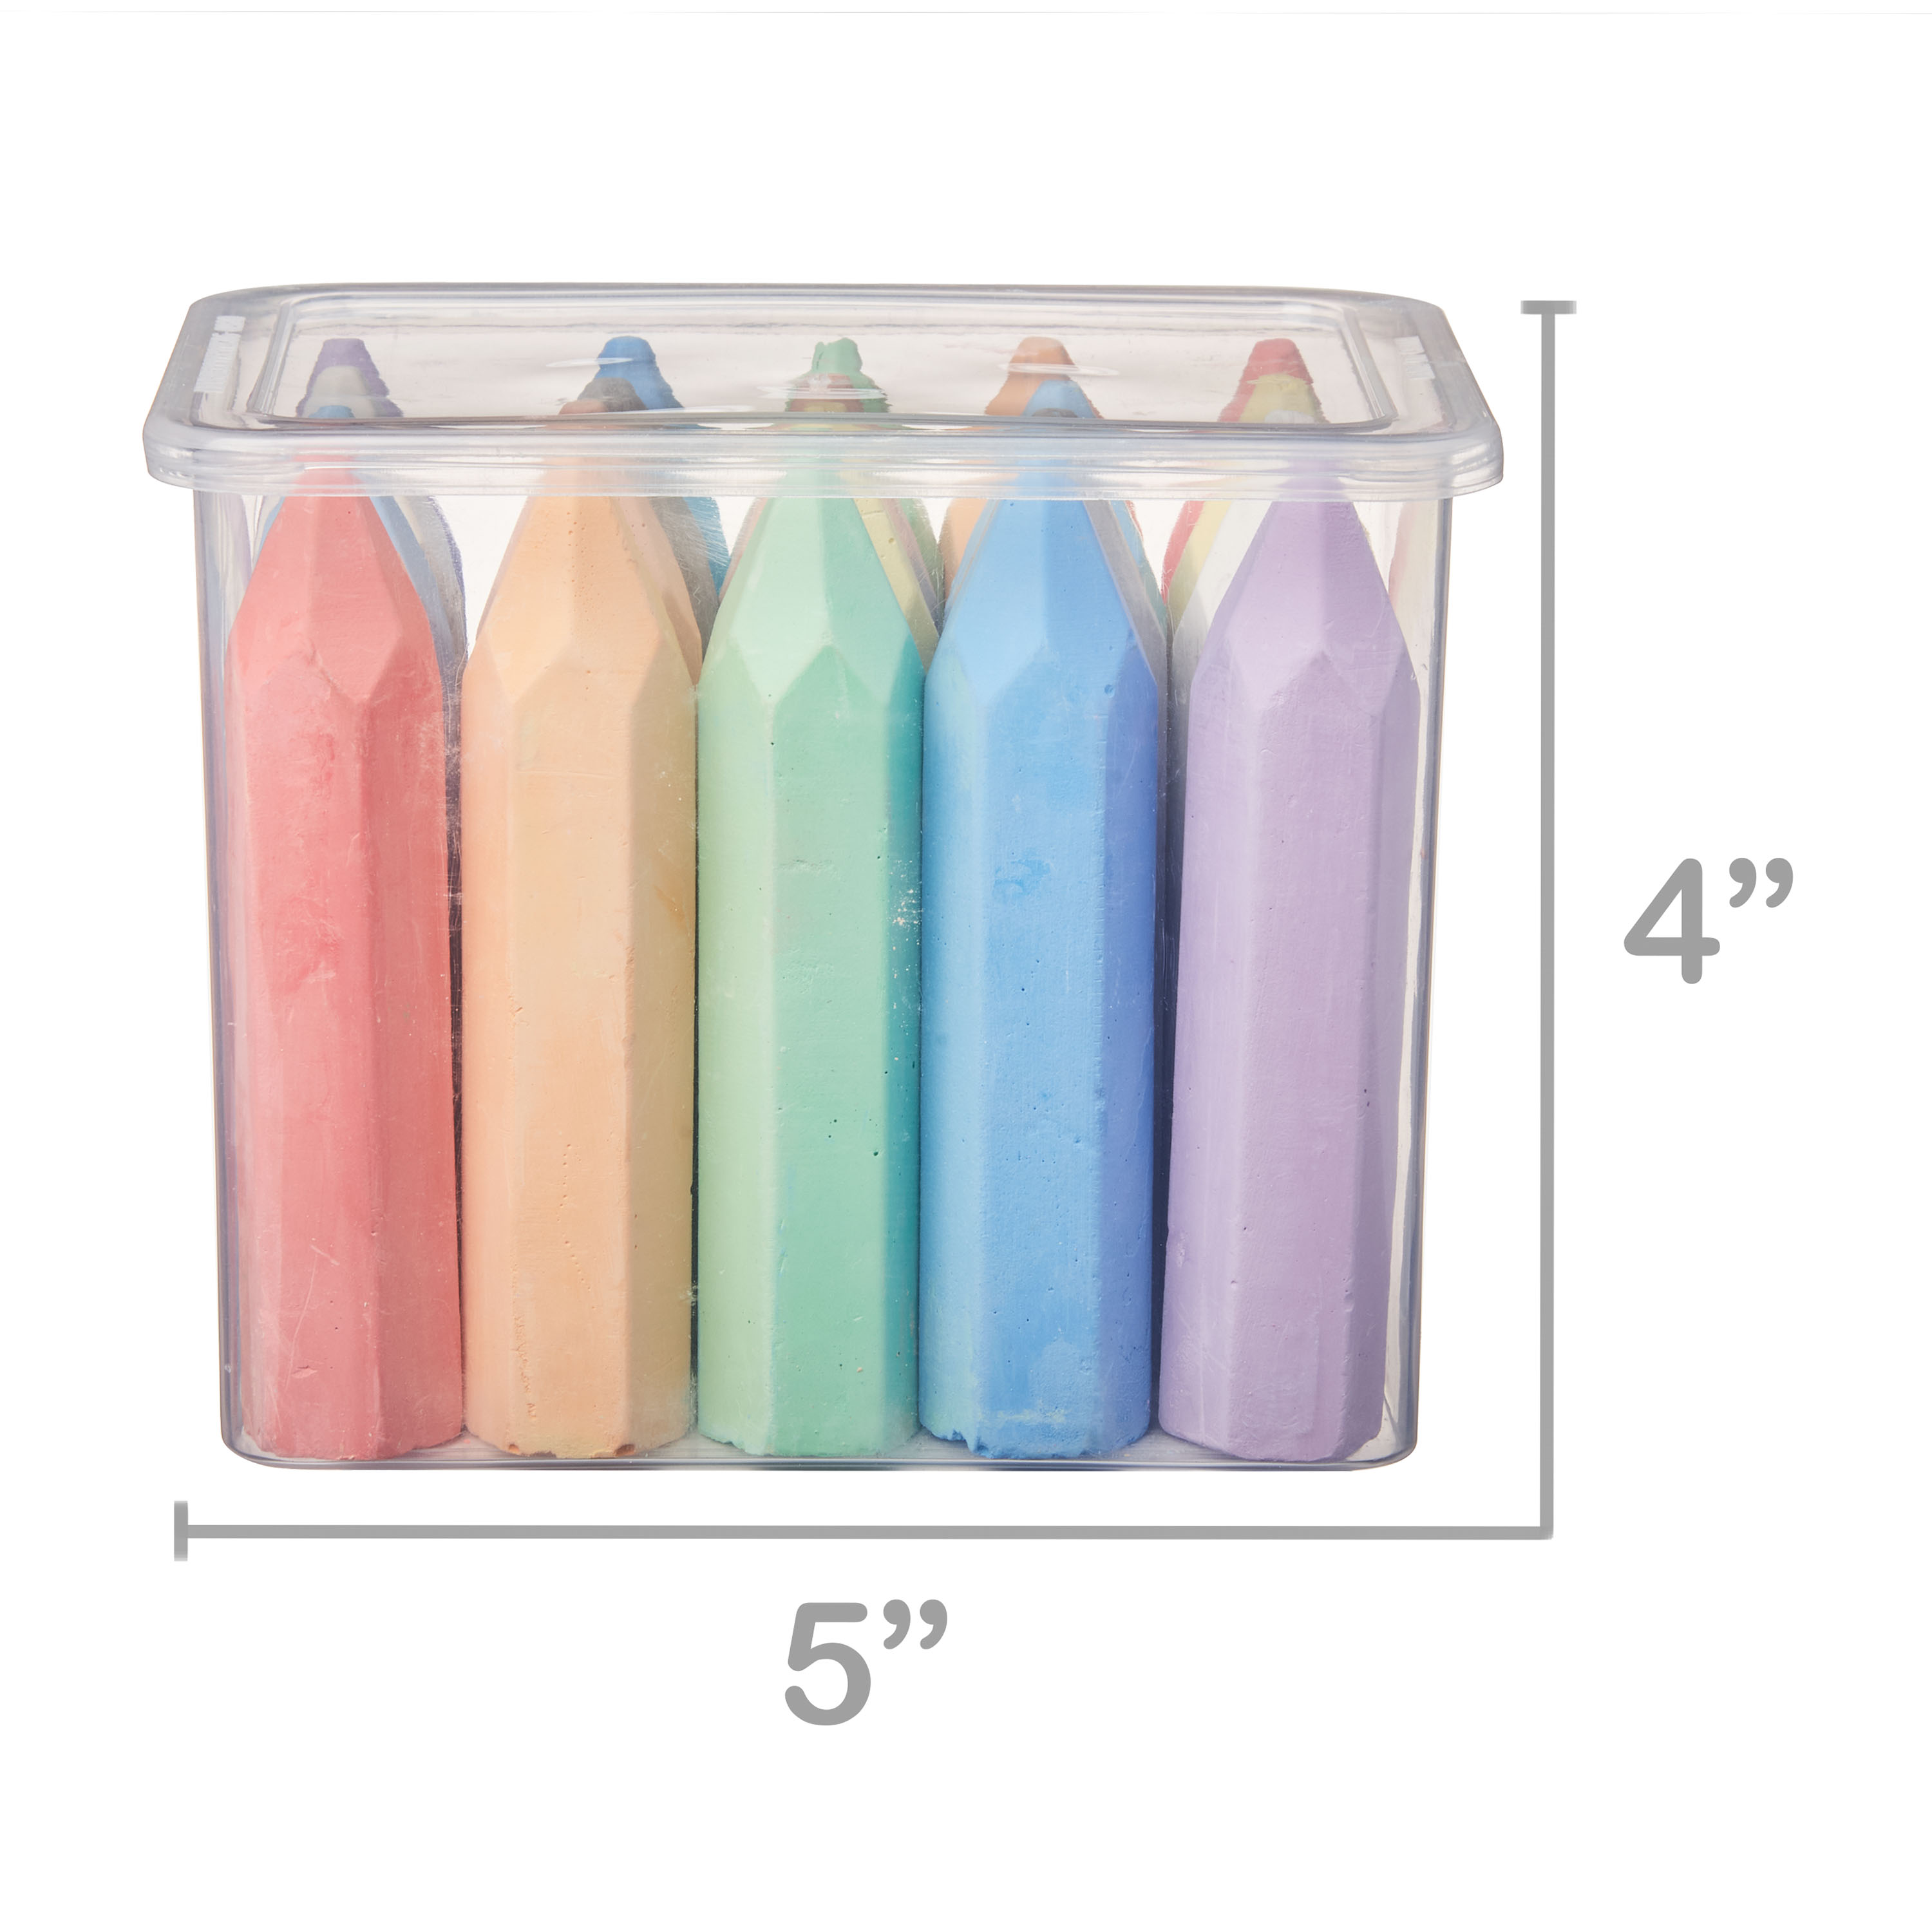 Play Day Sidewalk Chalk, 20 Pieces, Assorted Colors - image 3 of 5